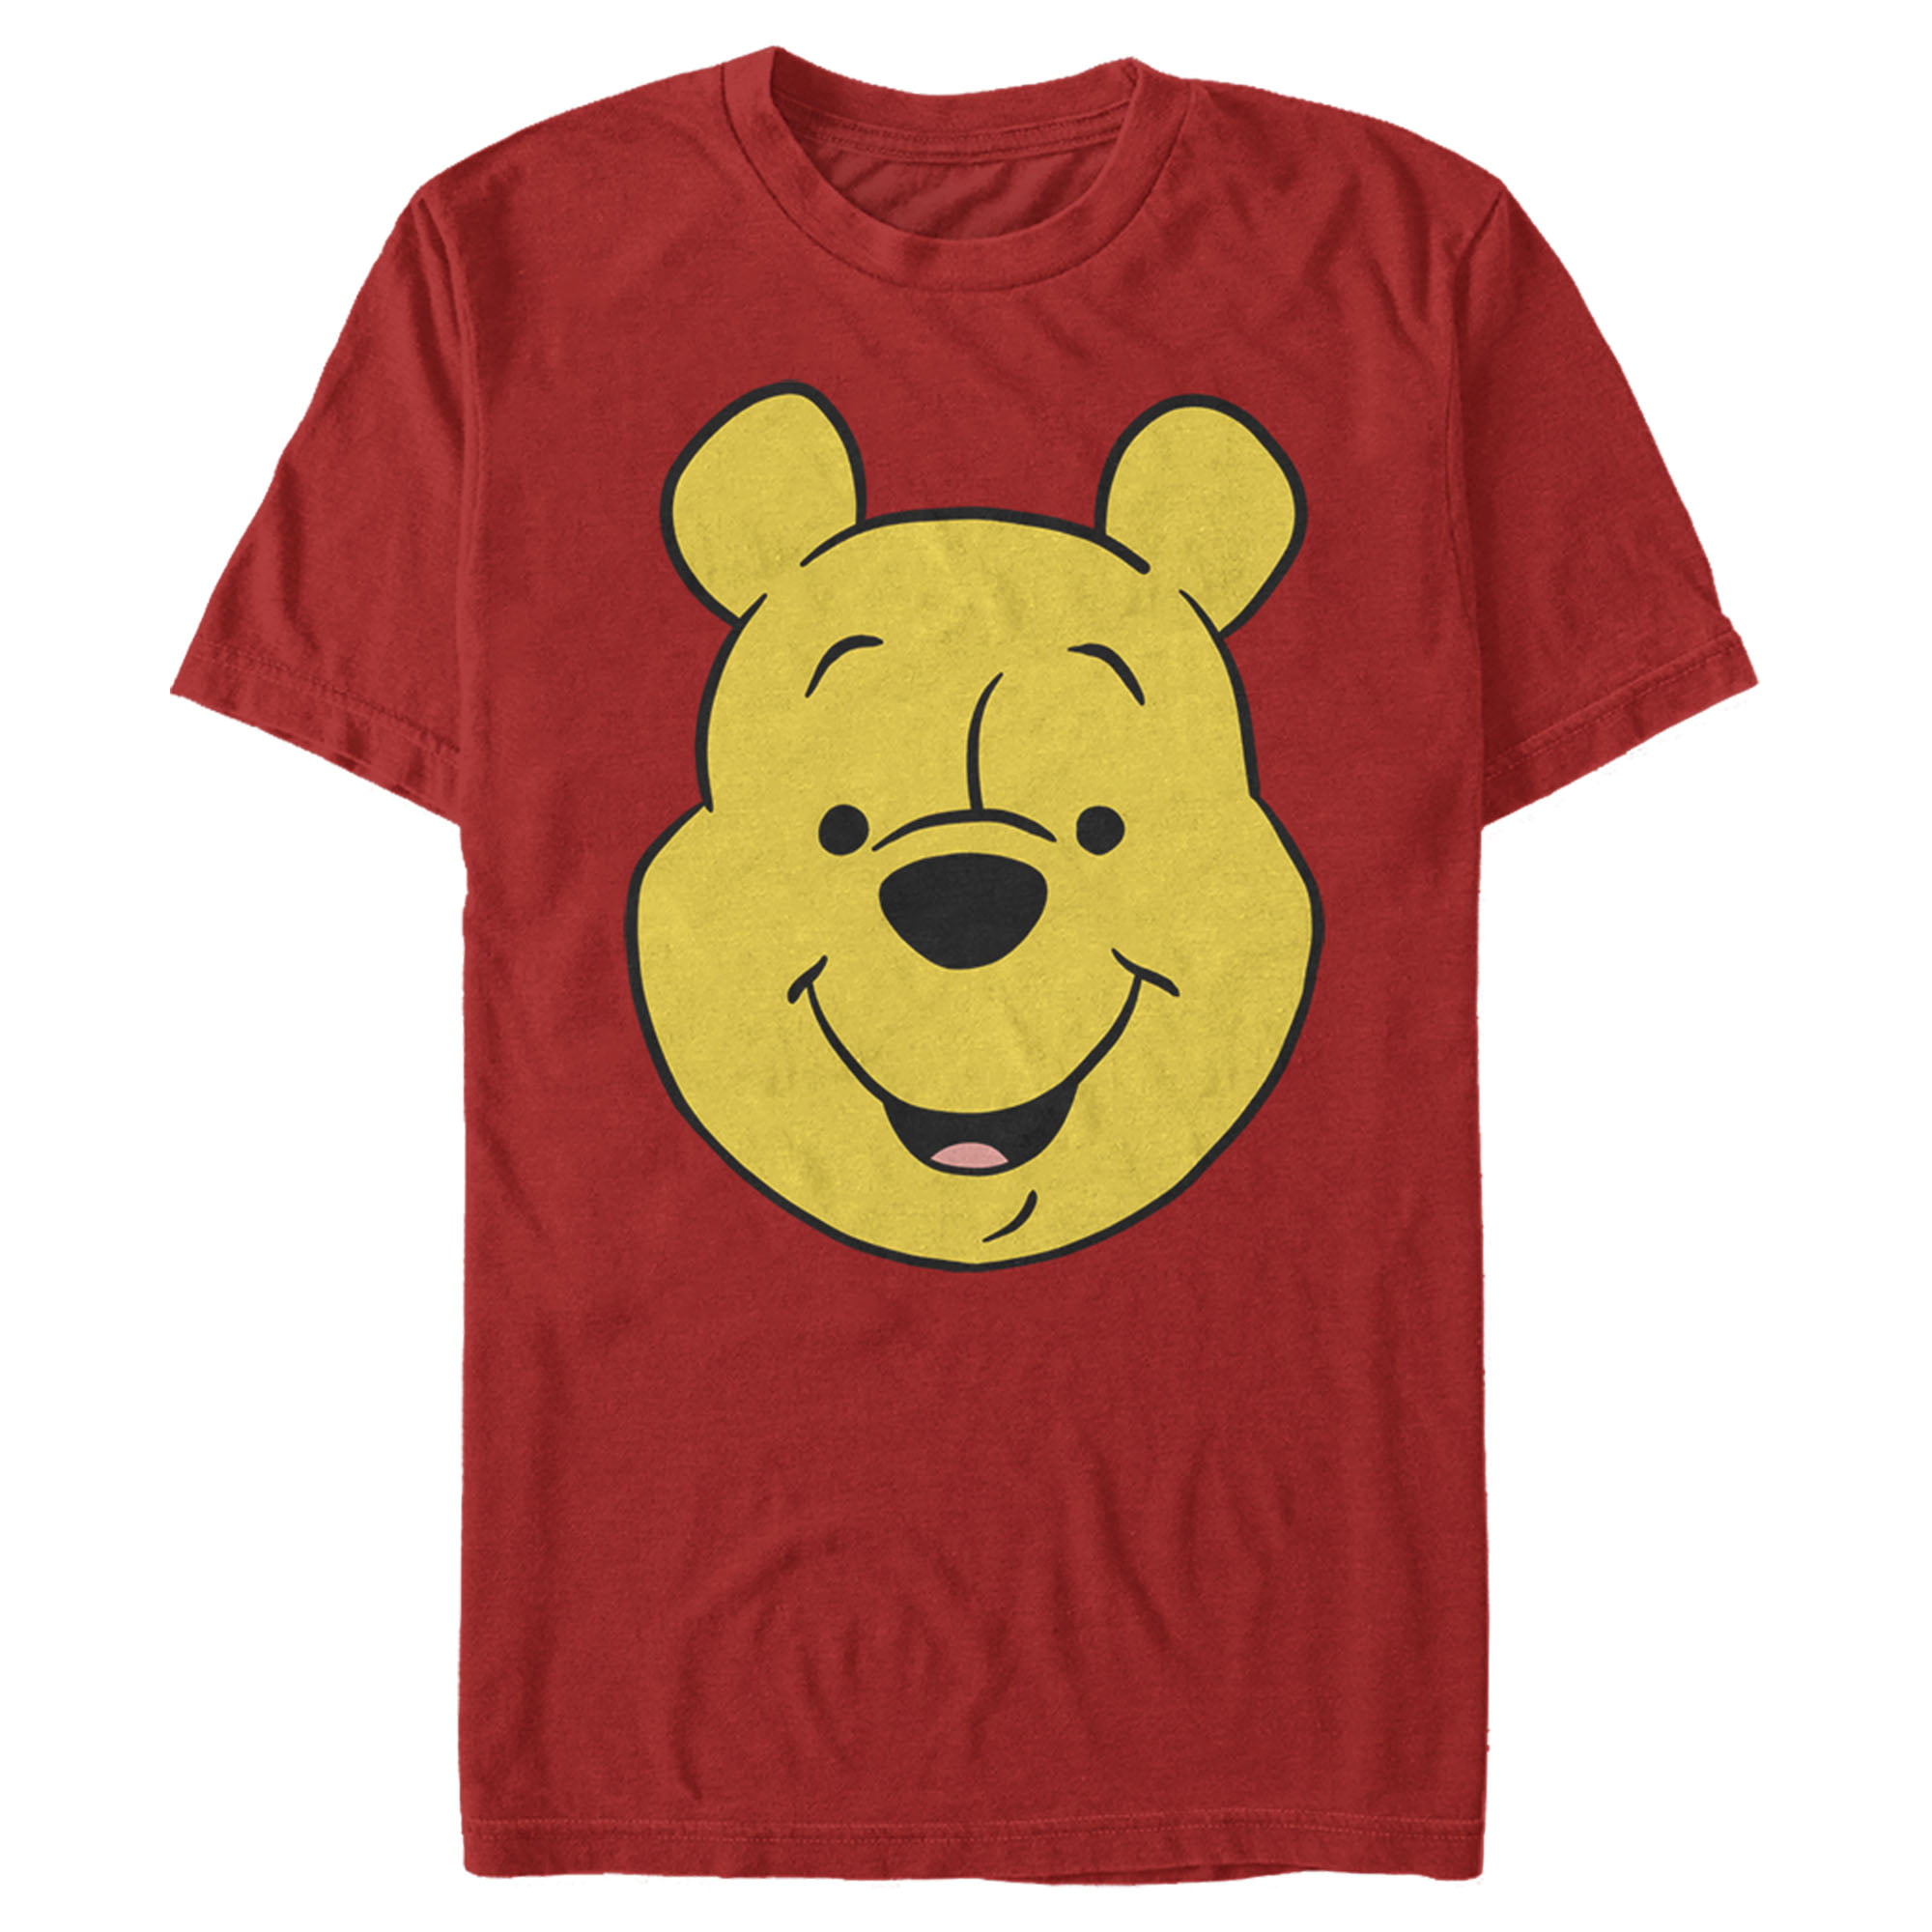 What does everyone think of the pooh bear jerseys and it's logo